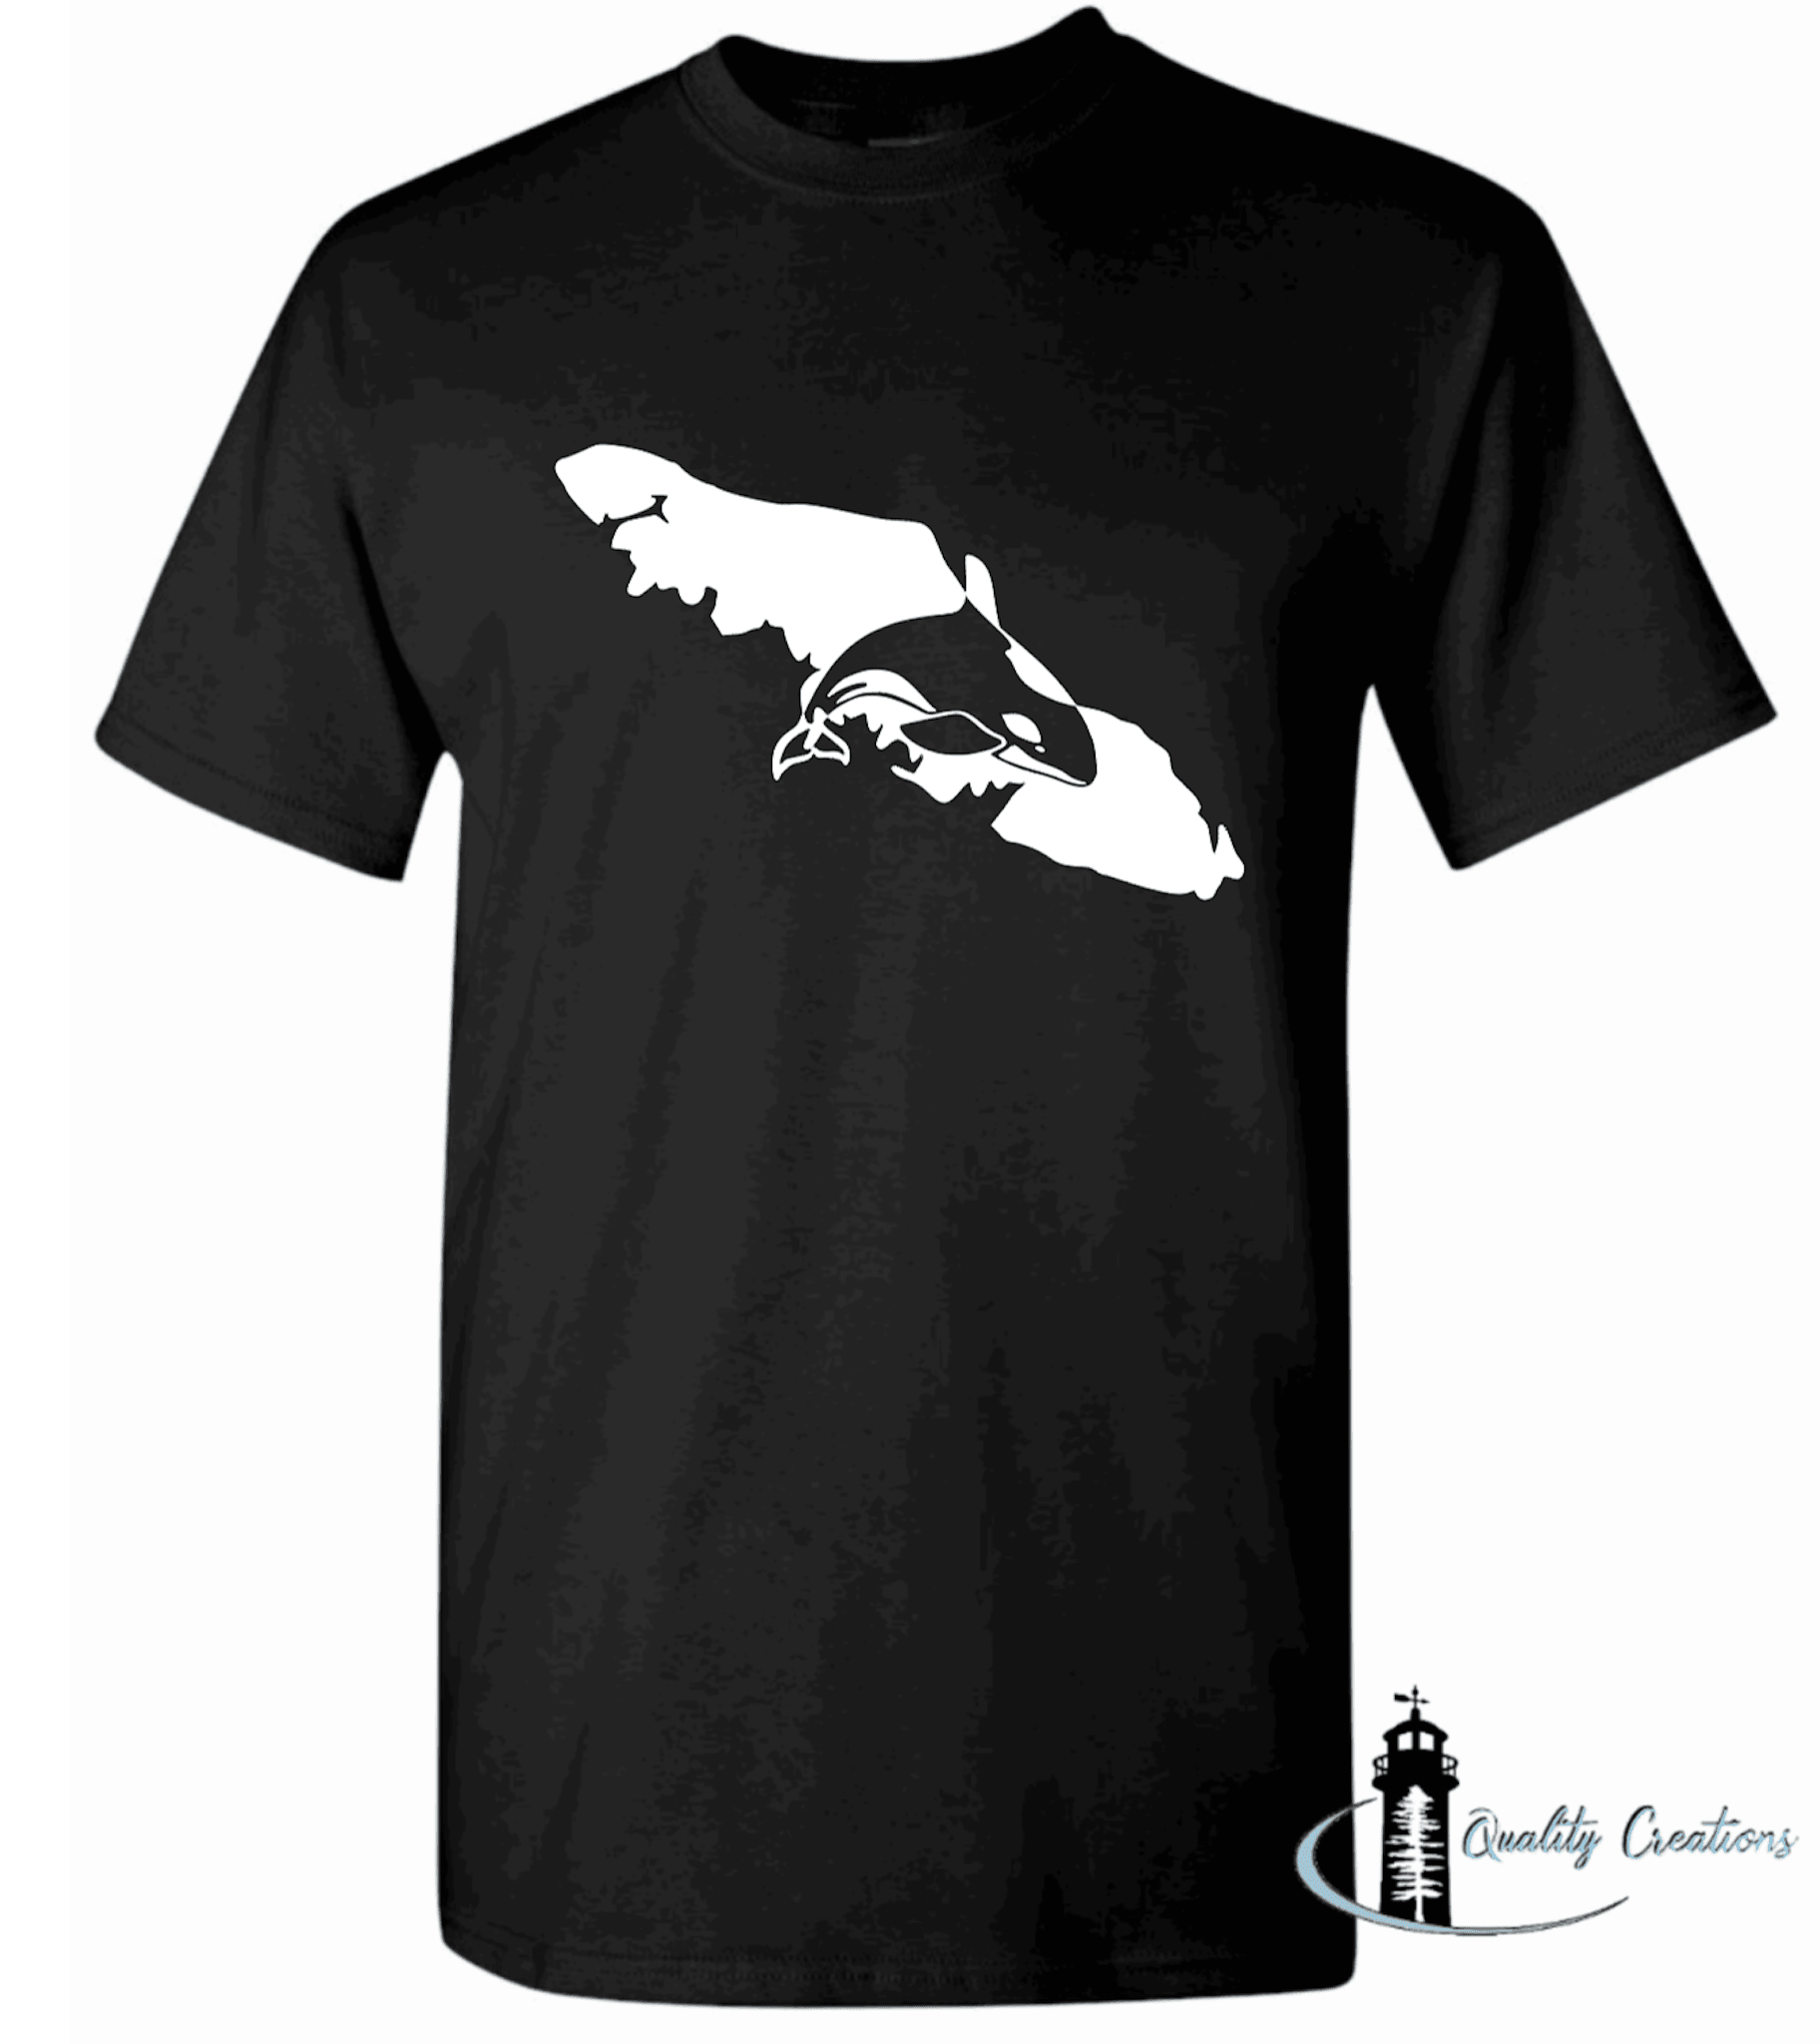 Vancouver Island white font orca killer whale quality creations canada